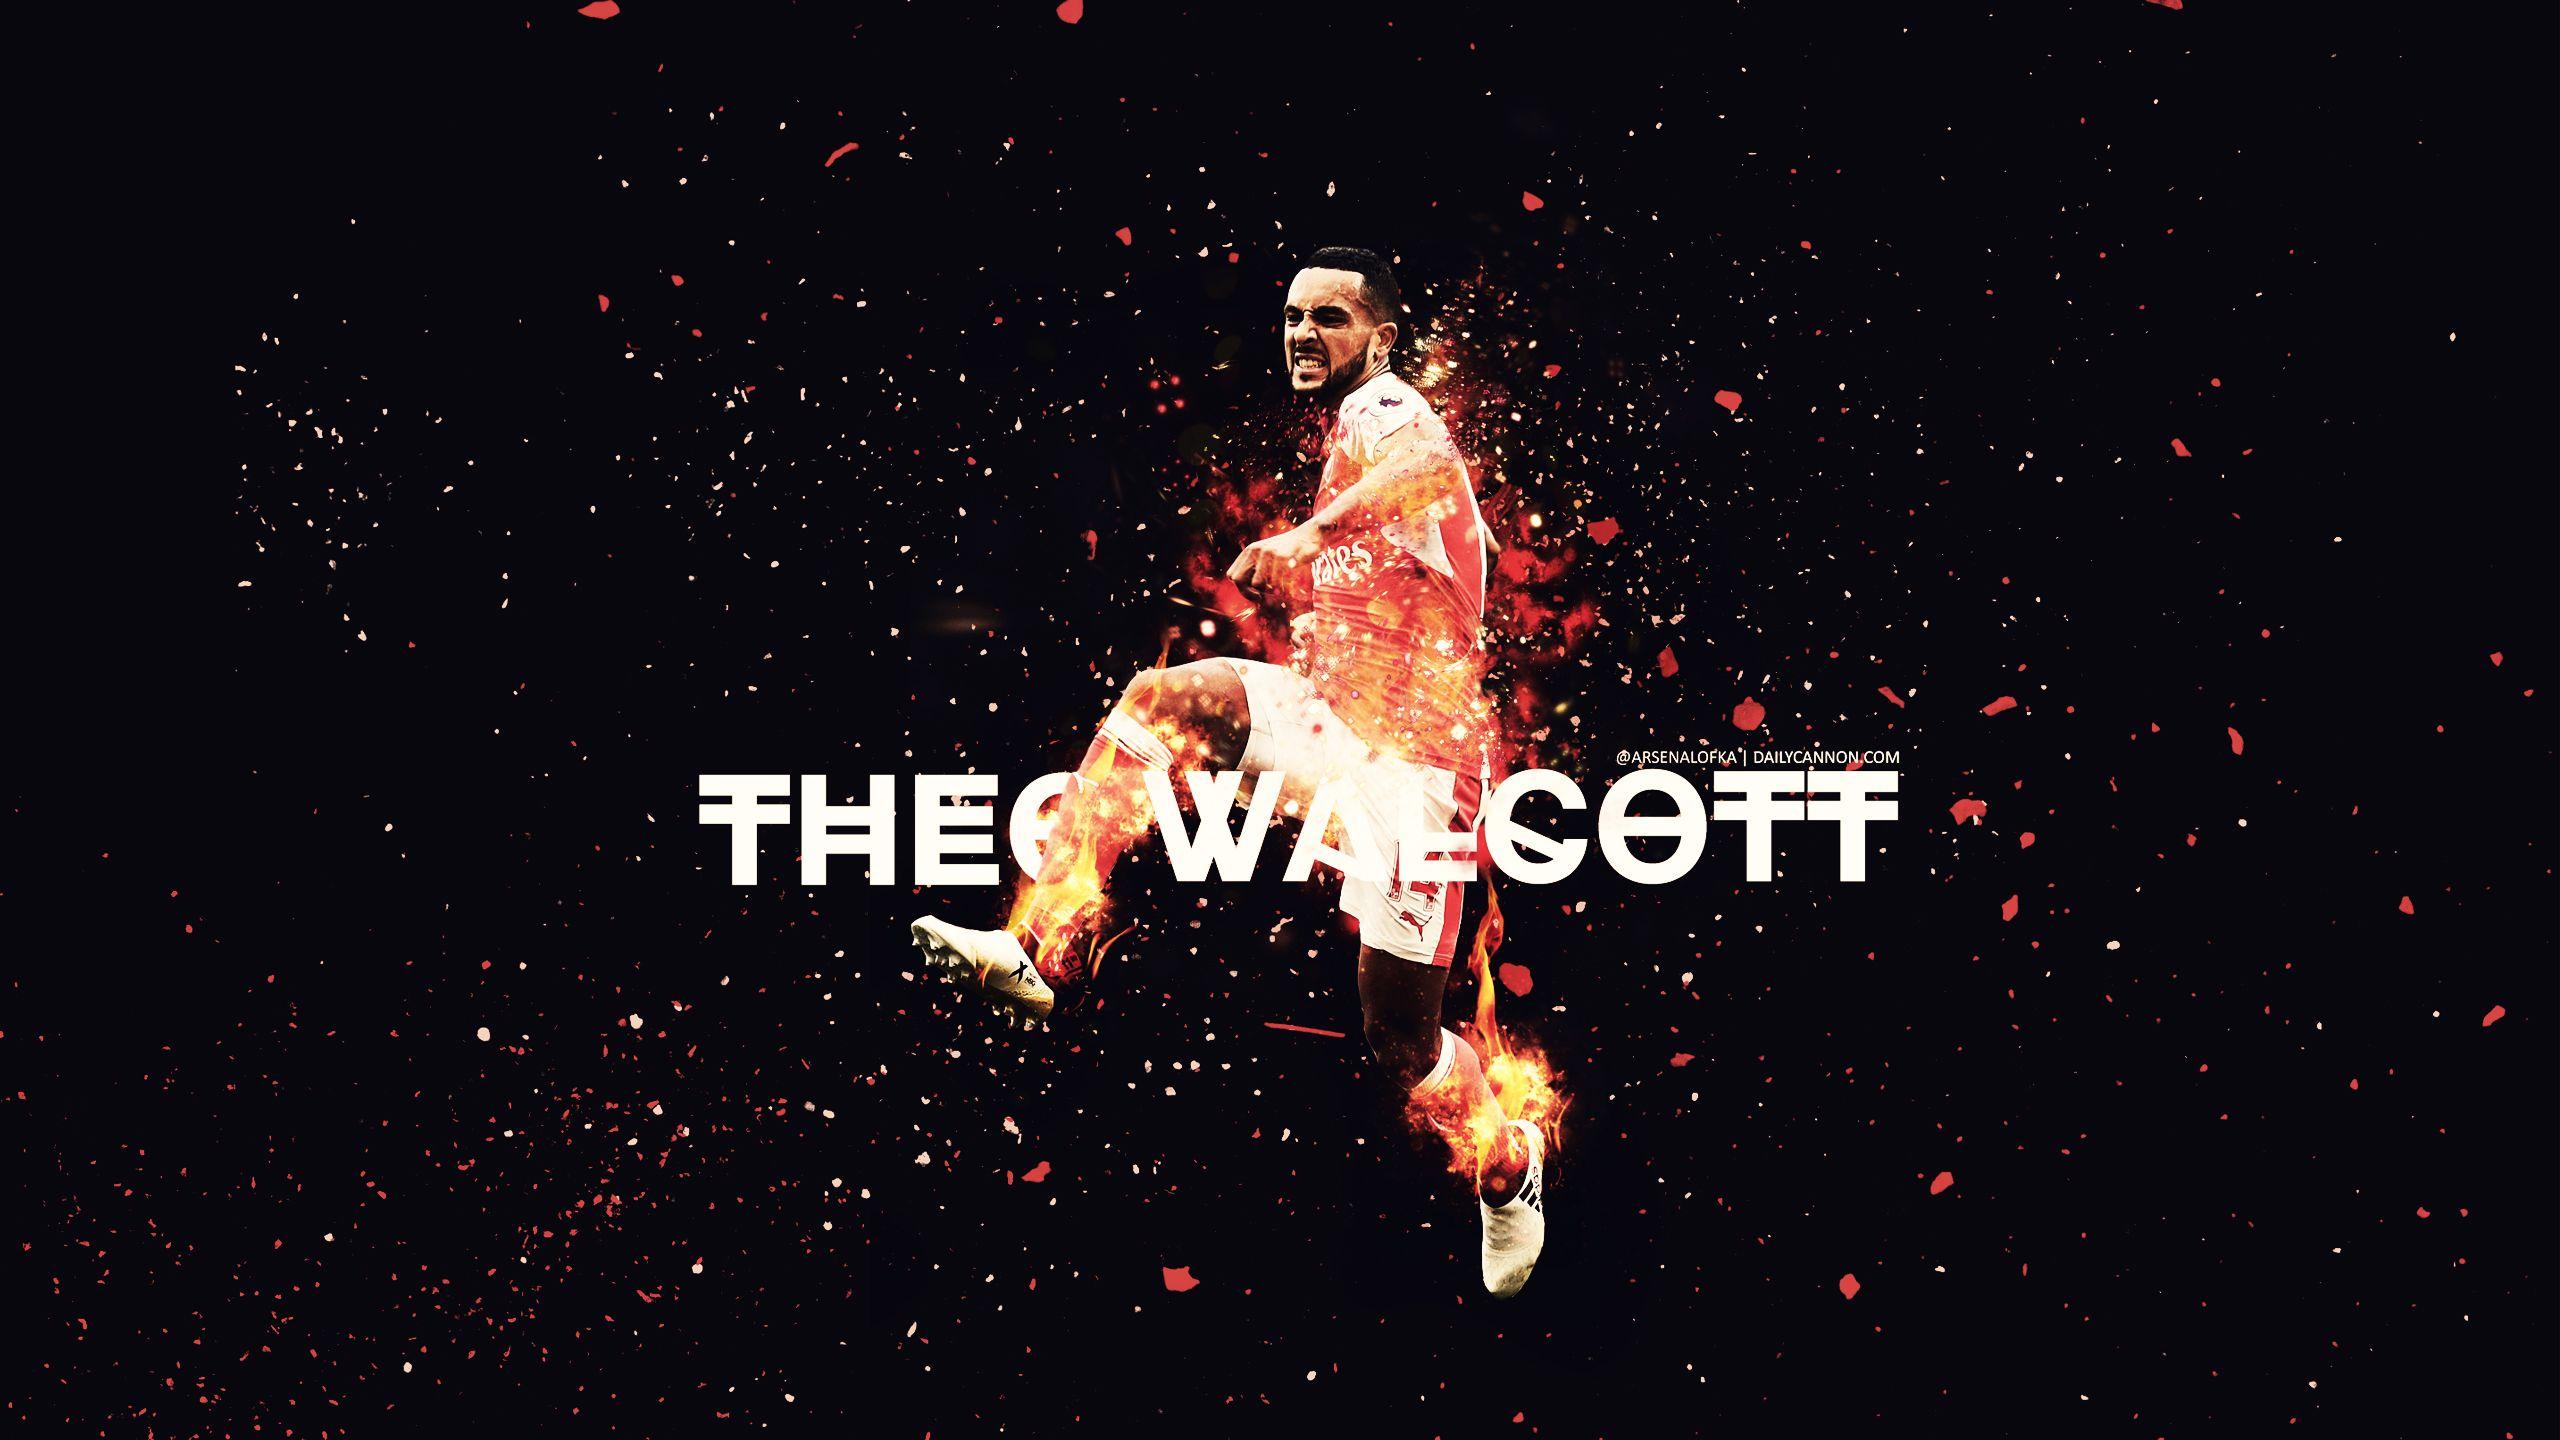 Theo Walcott Wallpaper and Social Covers